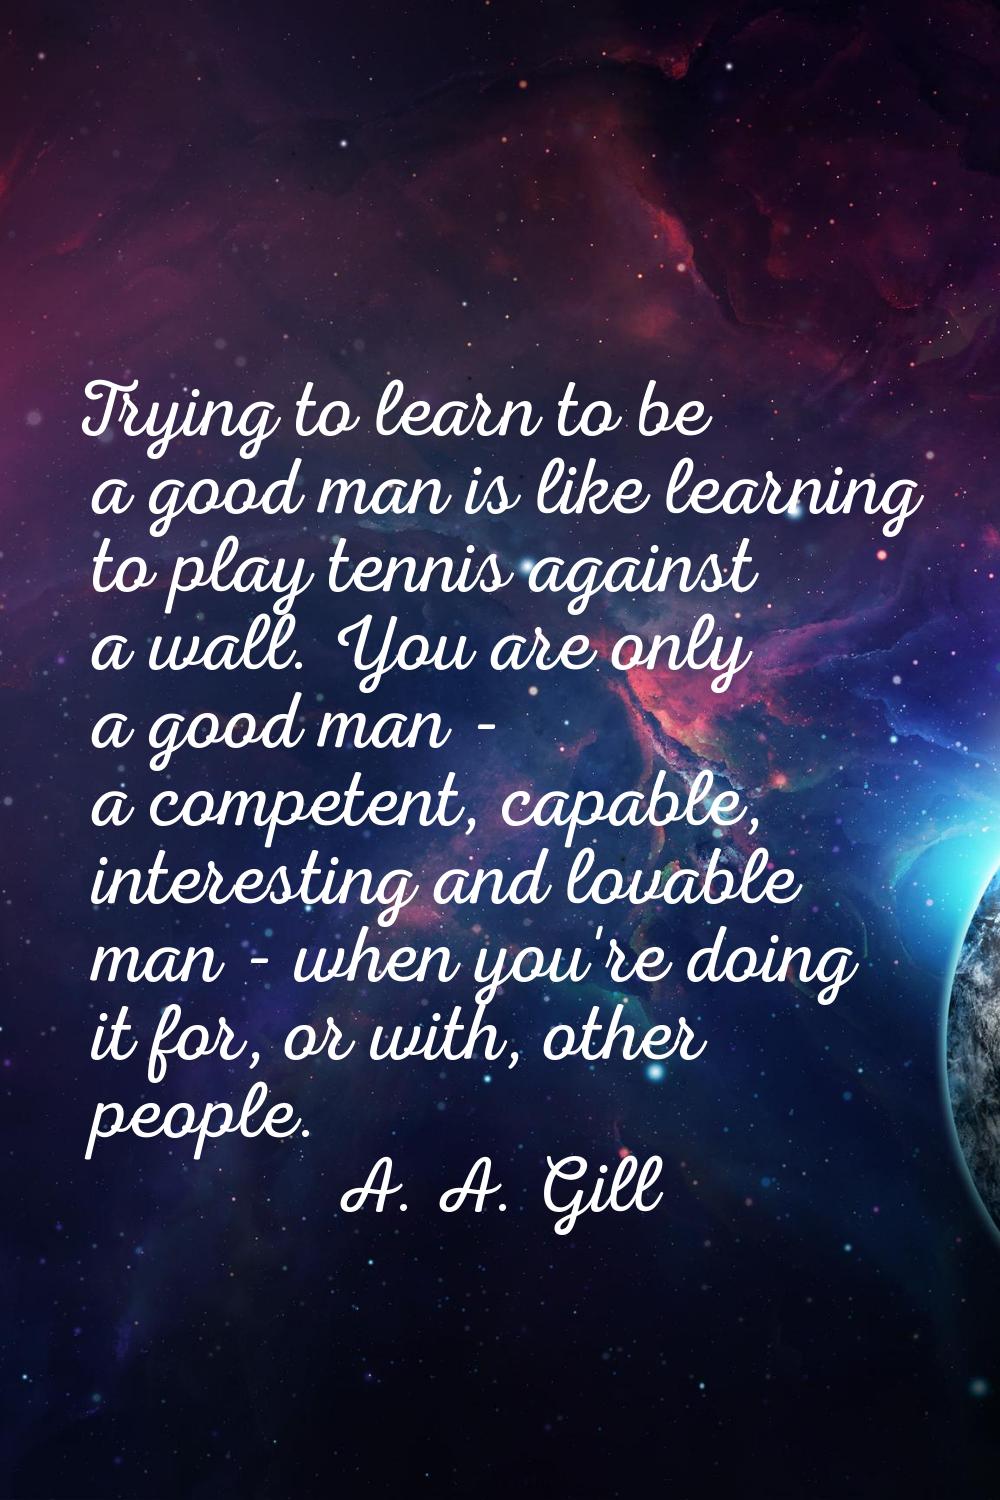 Trying to learn to be a good man is like learning to play tennis against a wall. You are only a goo